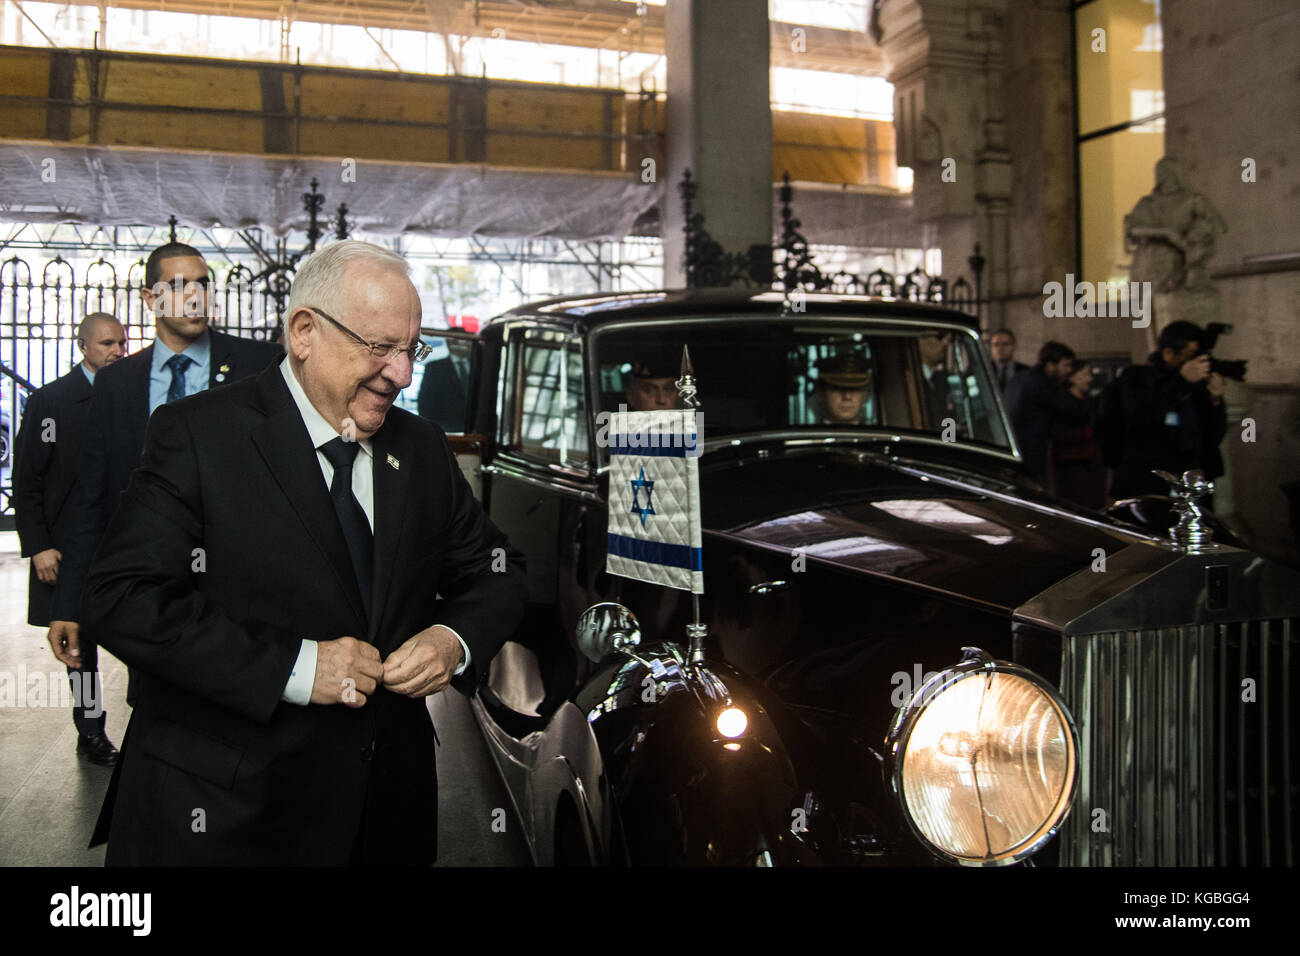 Madrid, Spain. 6 Nov, 2017. President of Israel Reuven Rivlin arrives to City Council in Madrid, Spain. Credit: Marcos del Mazo/Alamy Live News Stock Photo